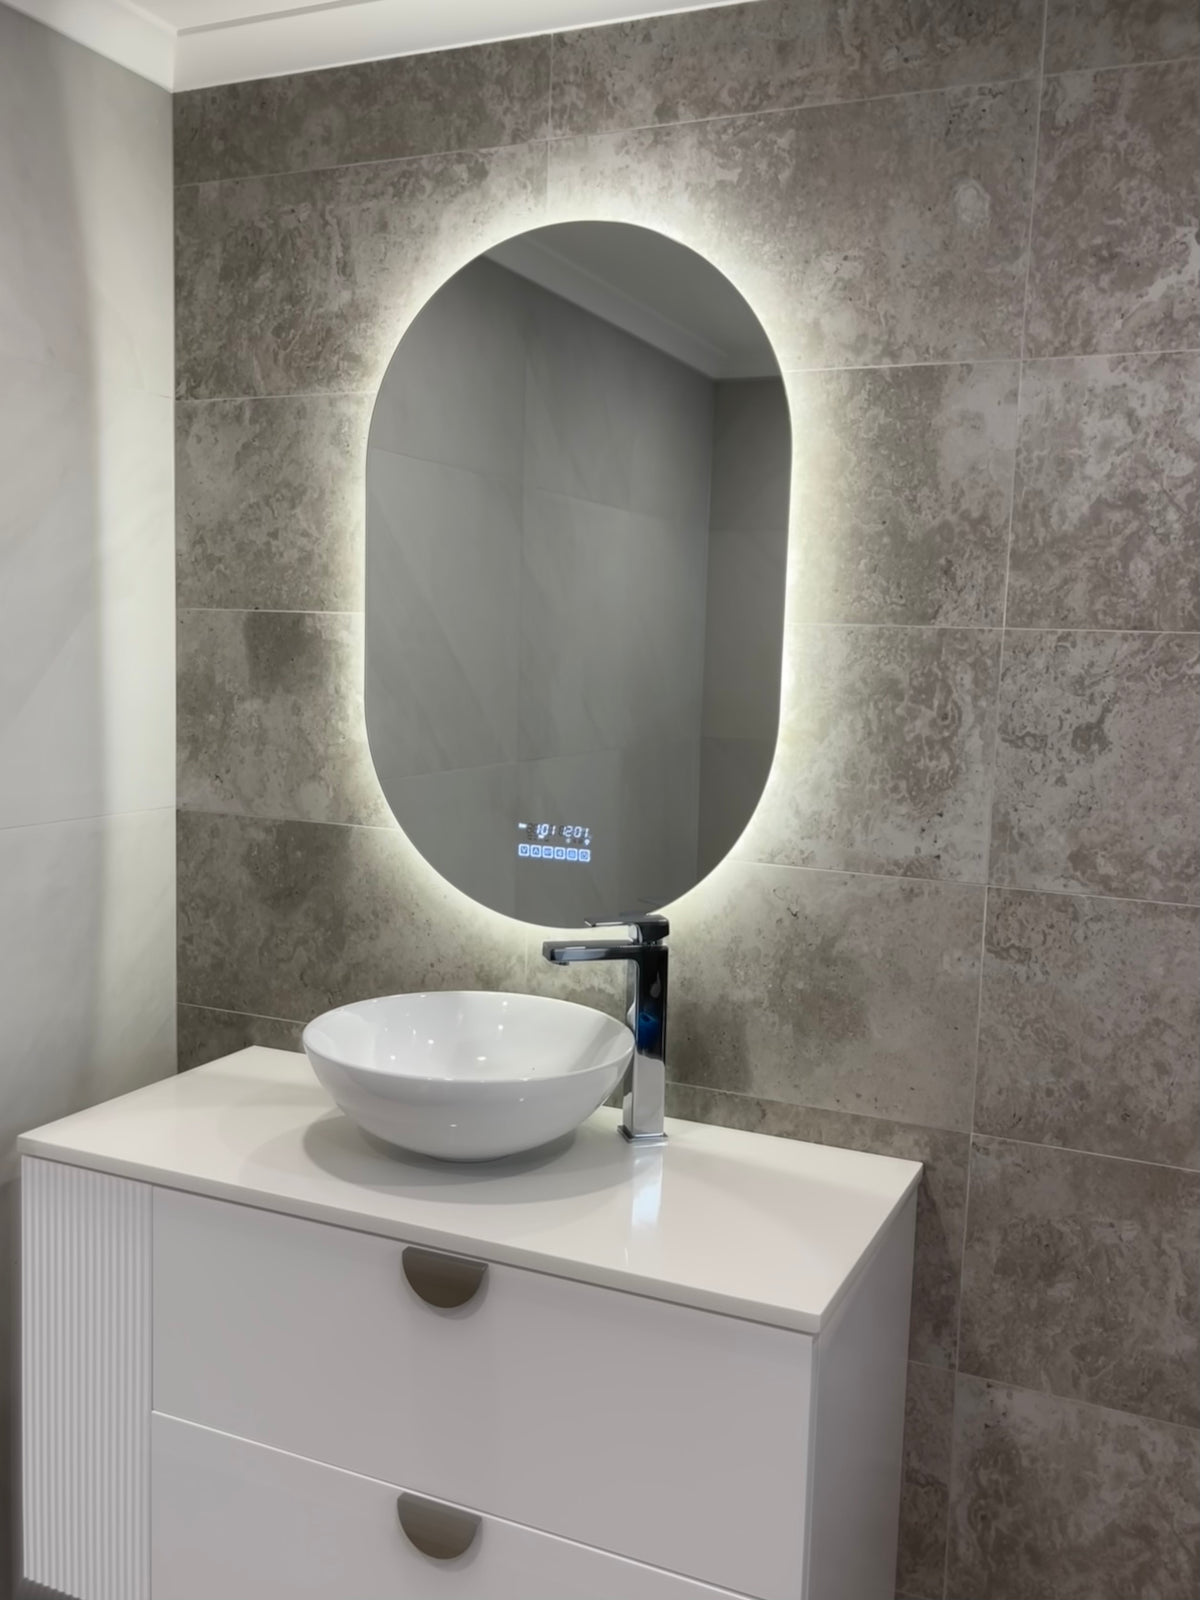 Oval Smart LED Mirror in a Neutral Earthy Washroom with Greyish-brown Dirt-like Tiles